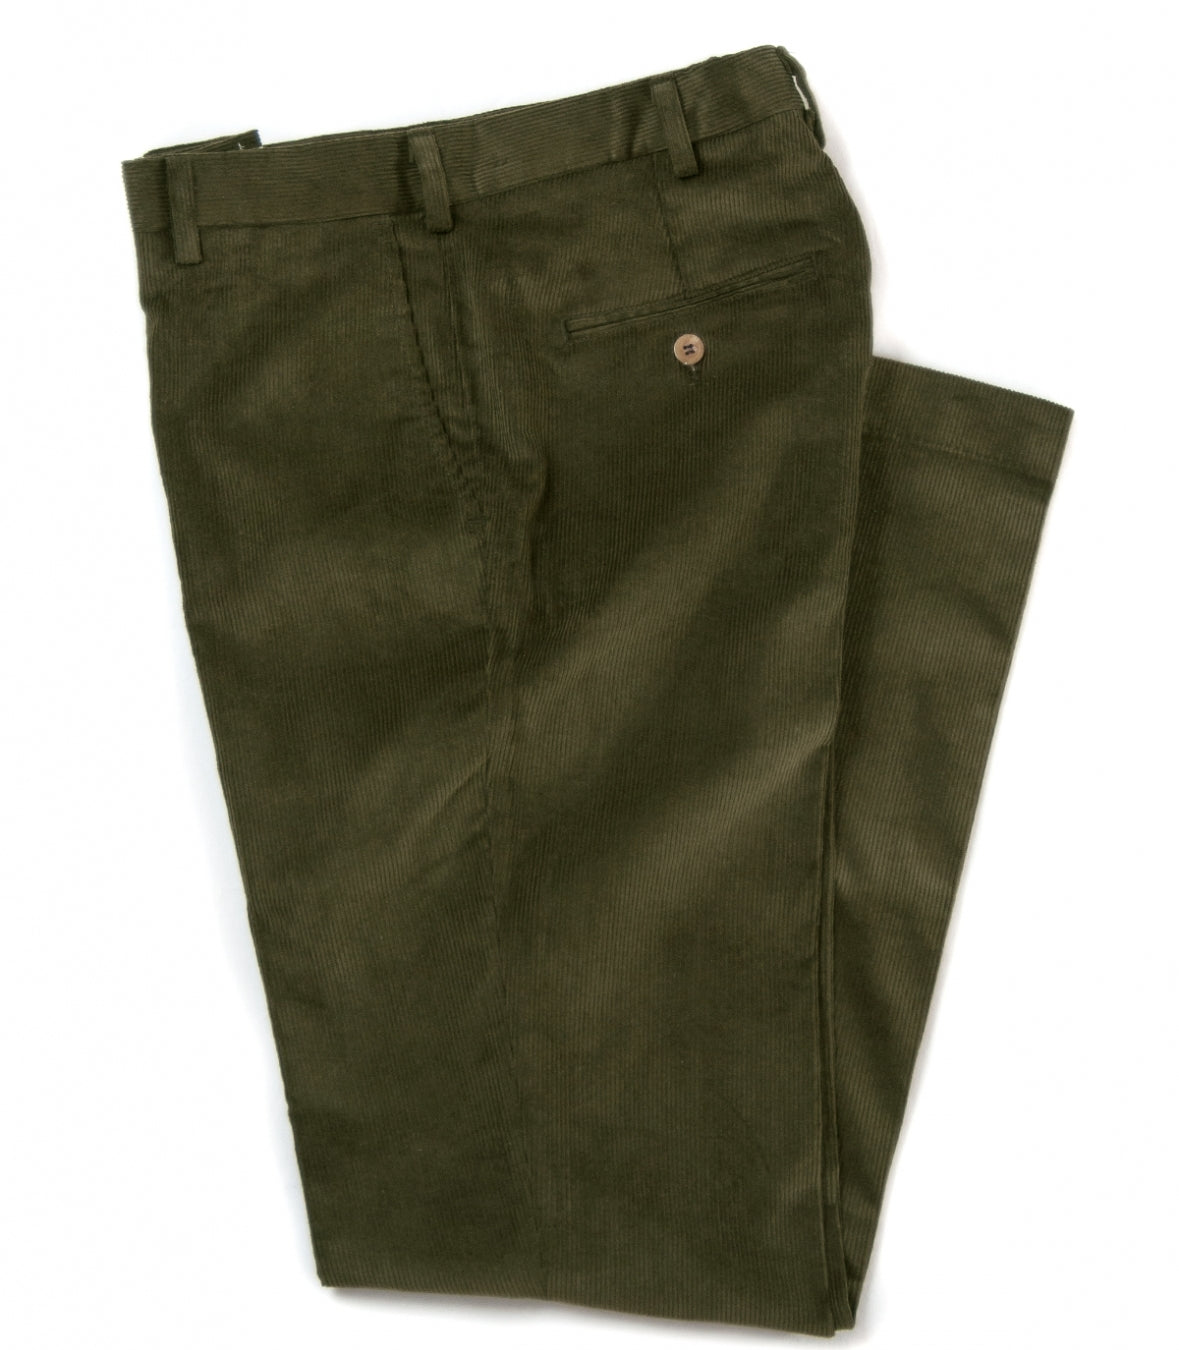 These corduroy pants = fall feels - Banana Republic Email Archive